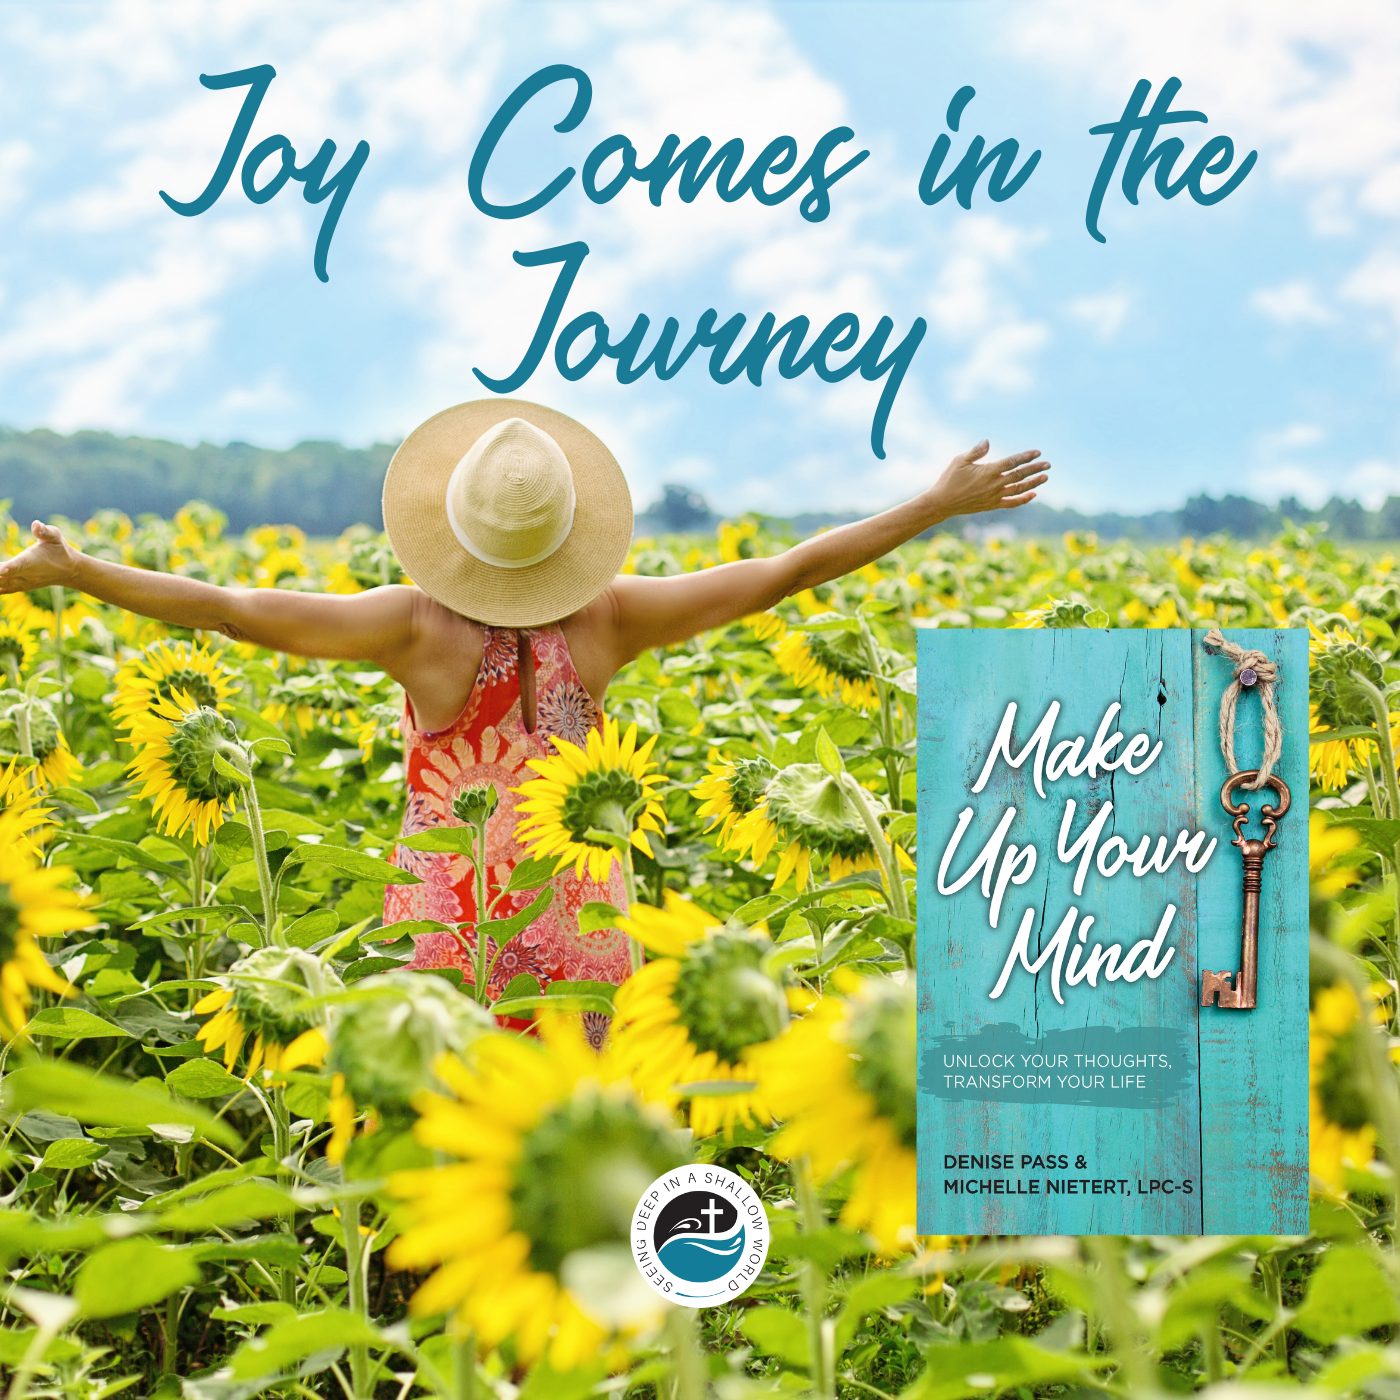 Joy Comes in the Journey